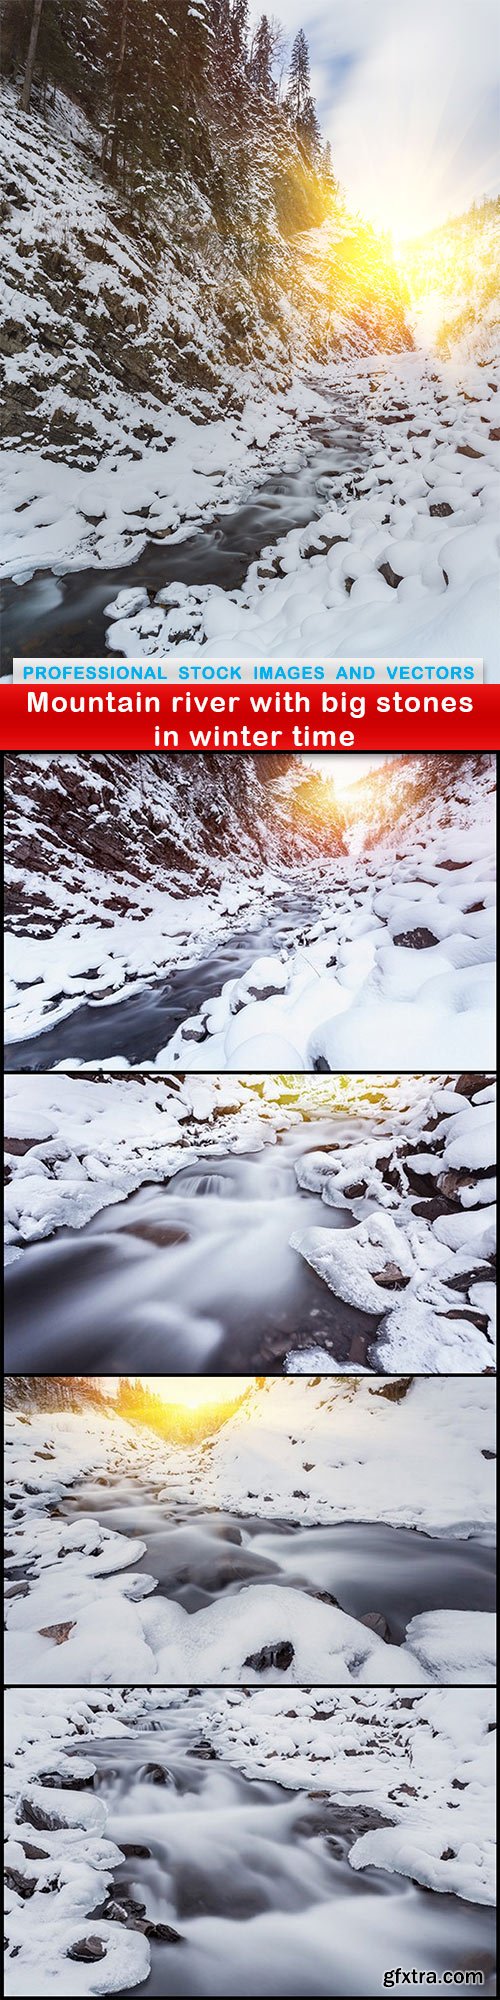 Mountain river with big stones in winter time - 5 UHQ JPEG